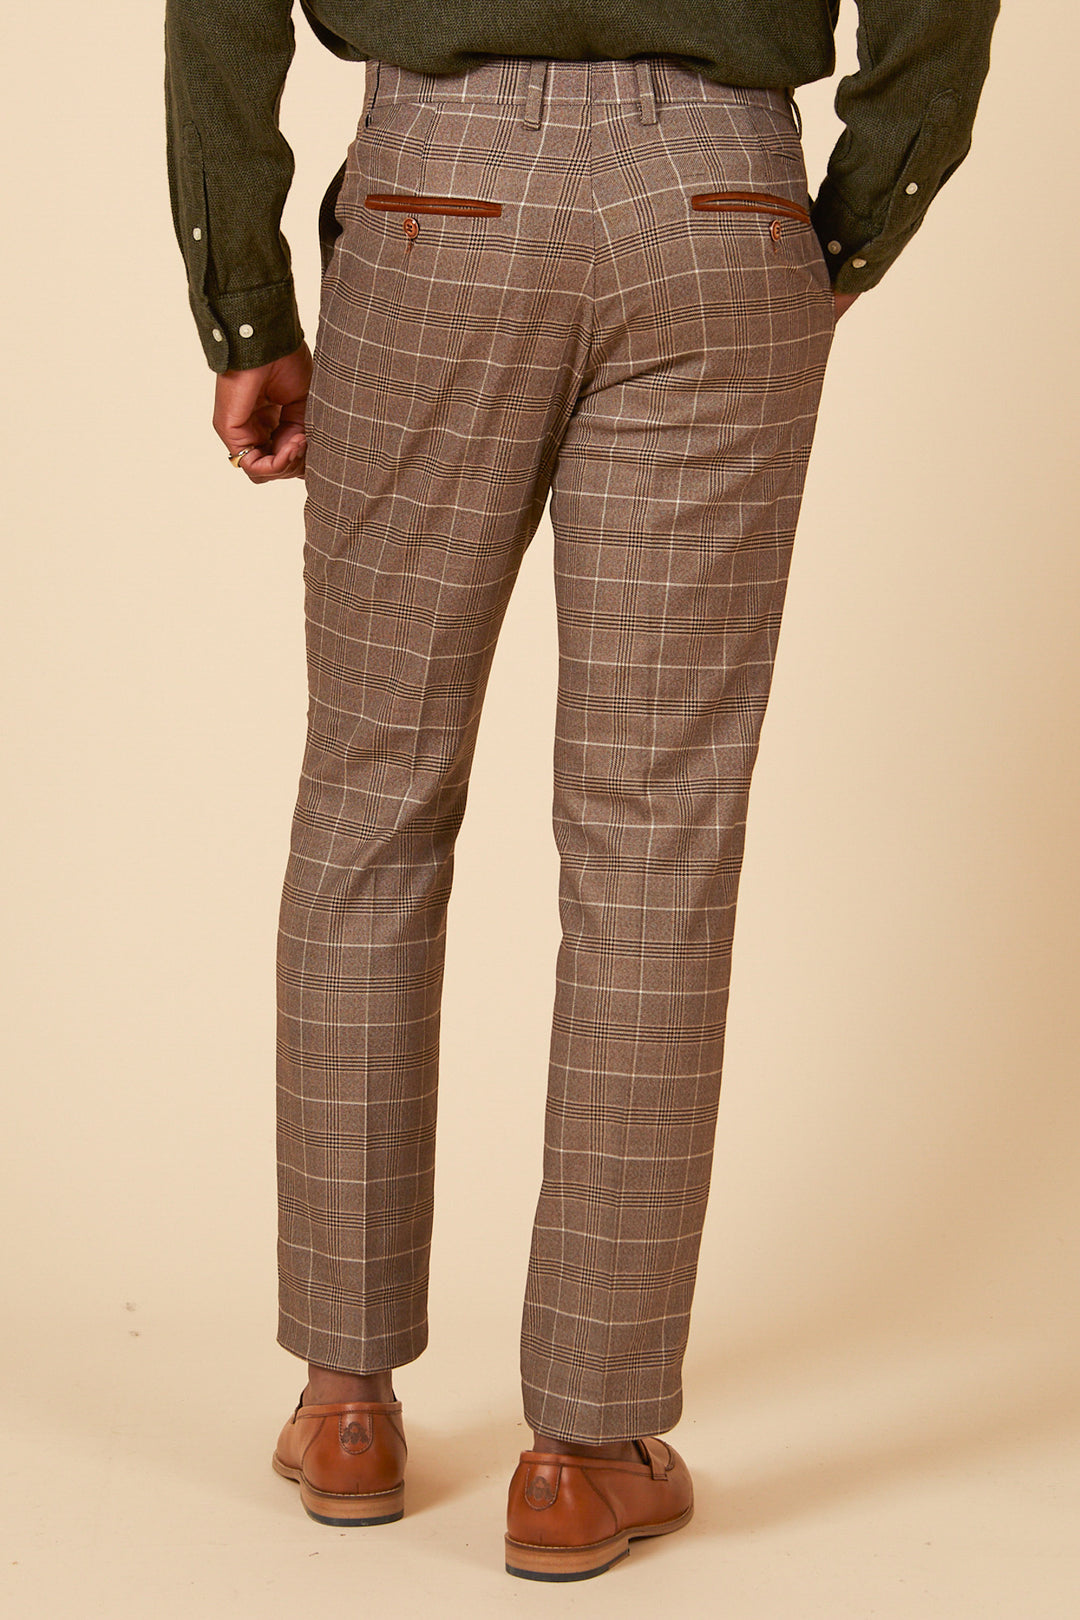 RAY - Tan Check Two Piece Suit